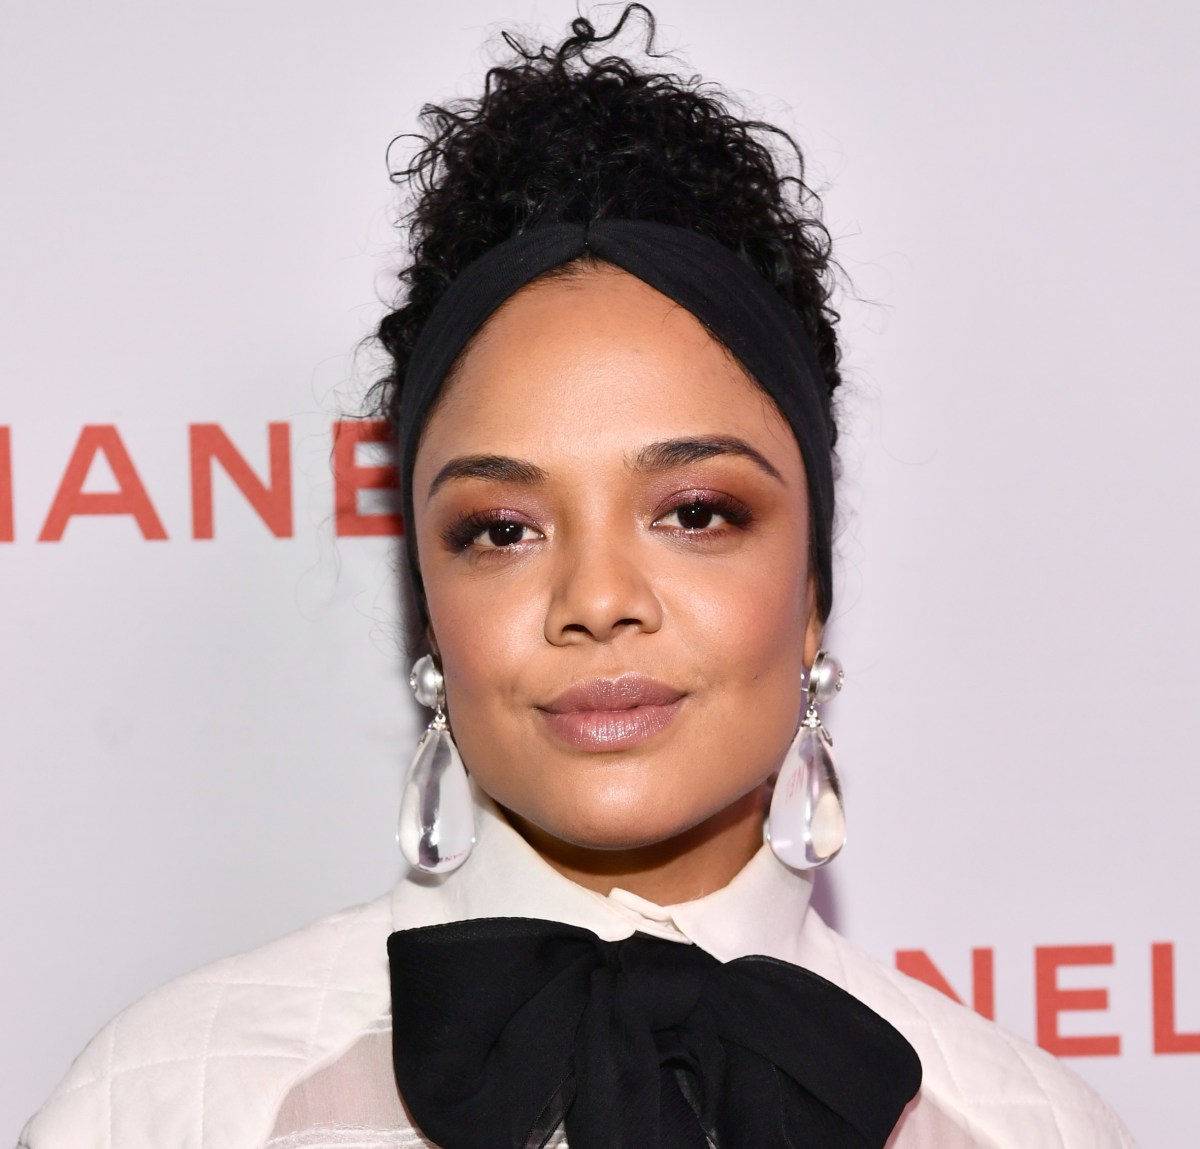 LOS ANGELES, CA - FEBRUARY 28: Tessa Thompson, wearing Chanel, attends a Chanel Party to celebrate the Chanel Beauty House and @WELOVECOCO at Chanel Beauty House on February 28, 2018 in Los Angeles, California.